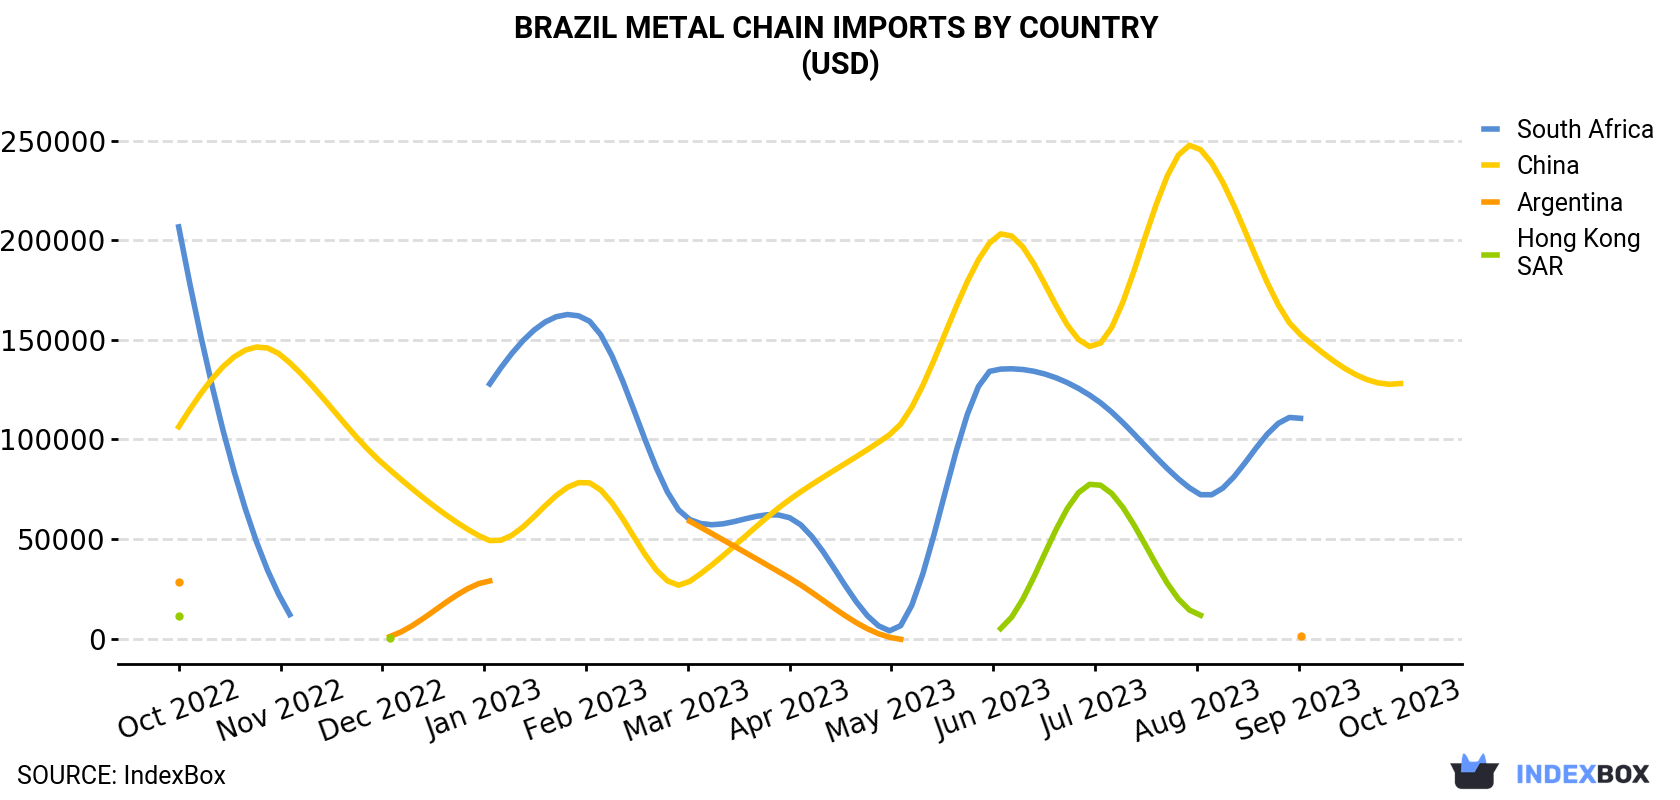 Brazil Metal Chain Imports By Country (USD)